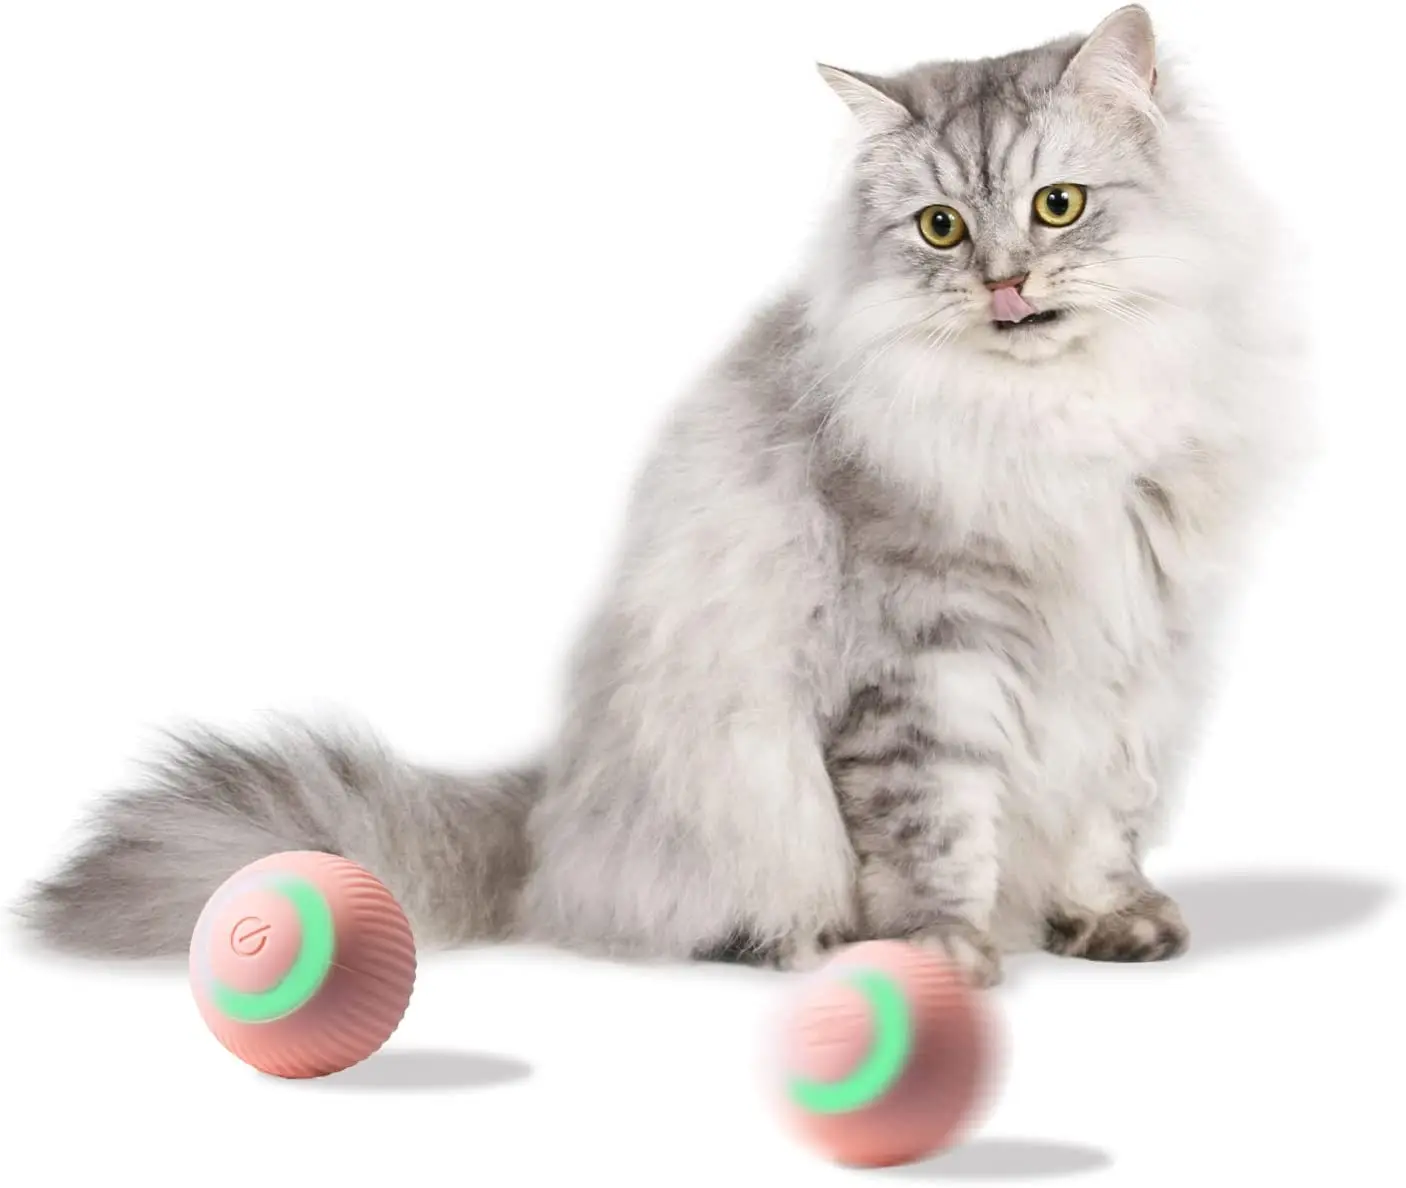 

Automatic Electric Cat Toys Rolling Ball Smart Self-Moving Kitten Toys for Indoor Playing Stimulate Hunting Instinct for Cats